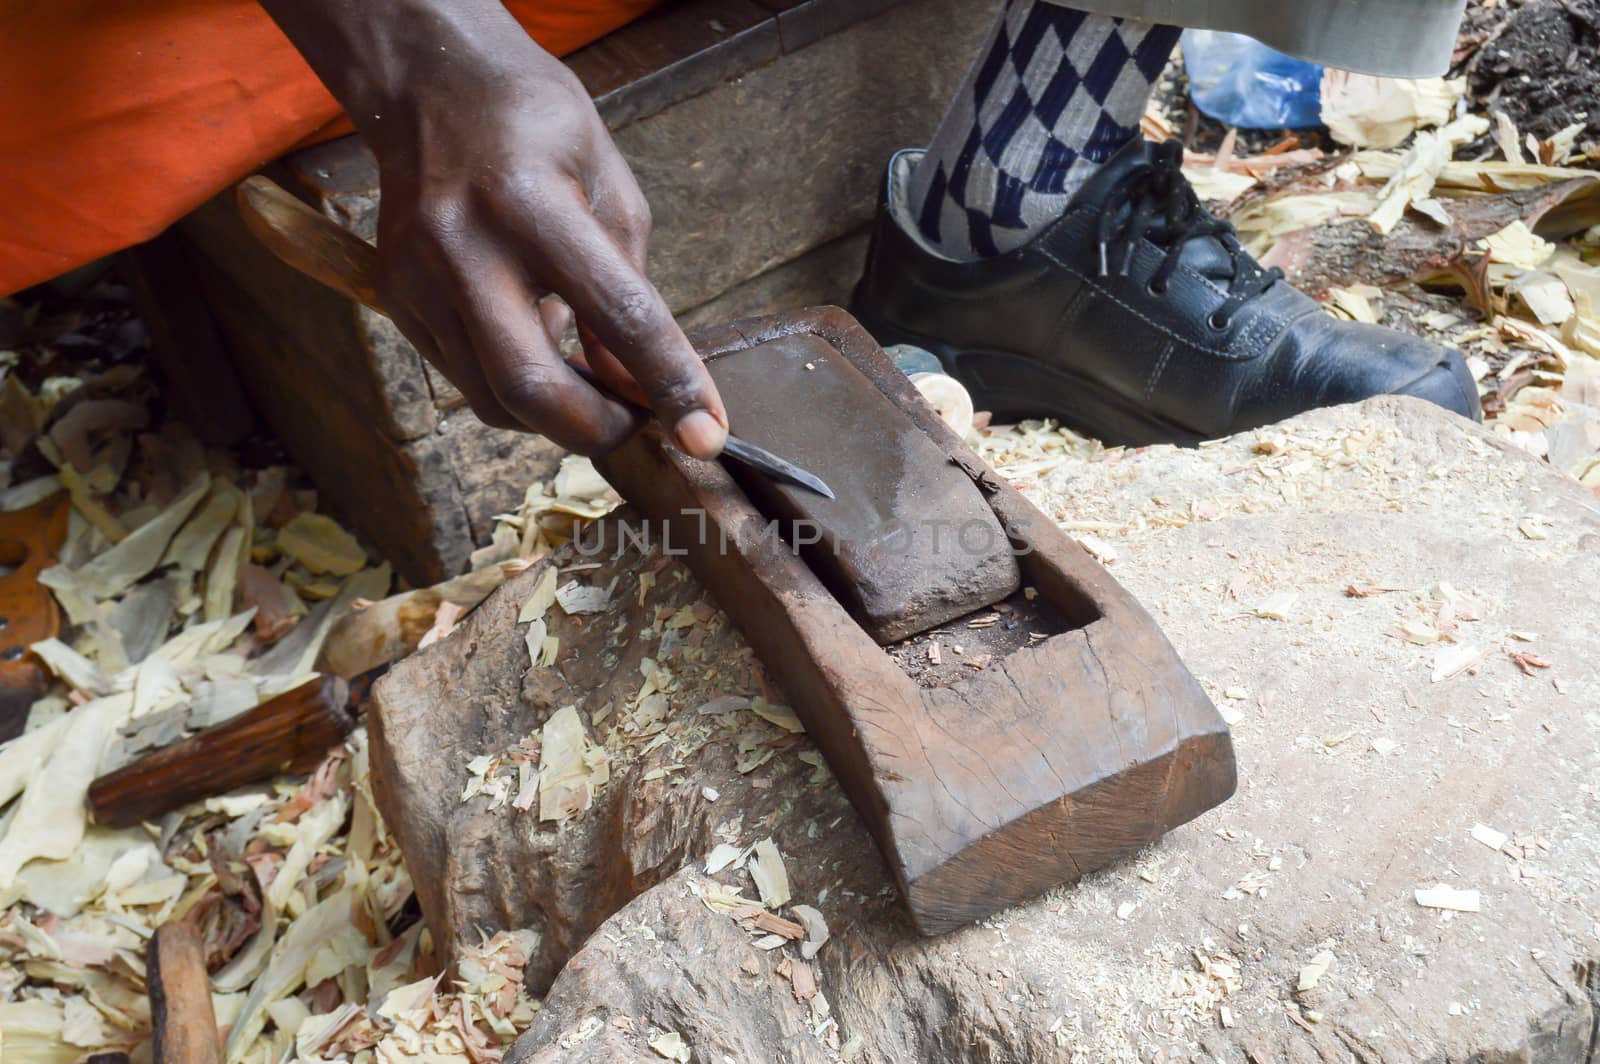 Kenyan sculptor sharpening a chisel on a pumice stone in a cooperative in Mombasa